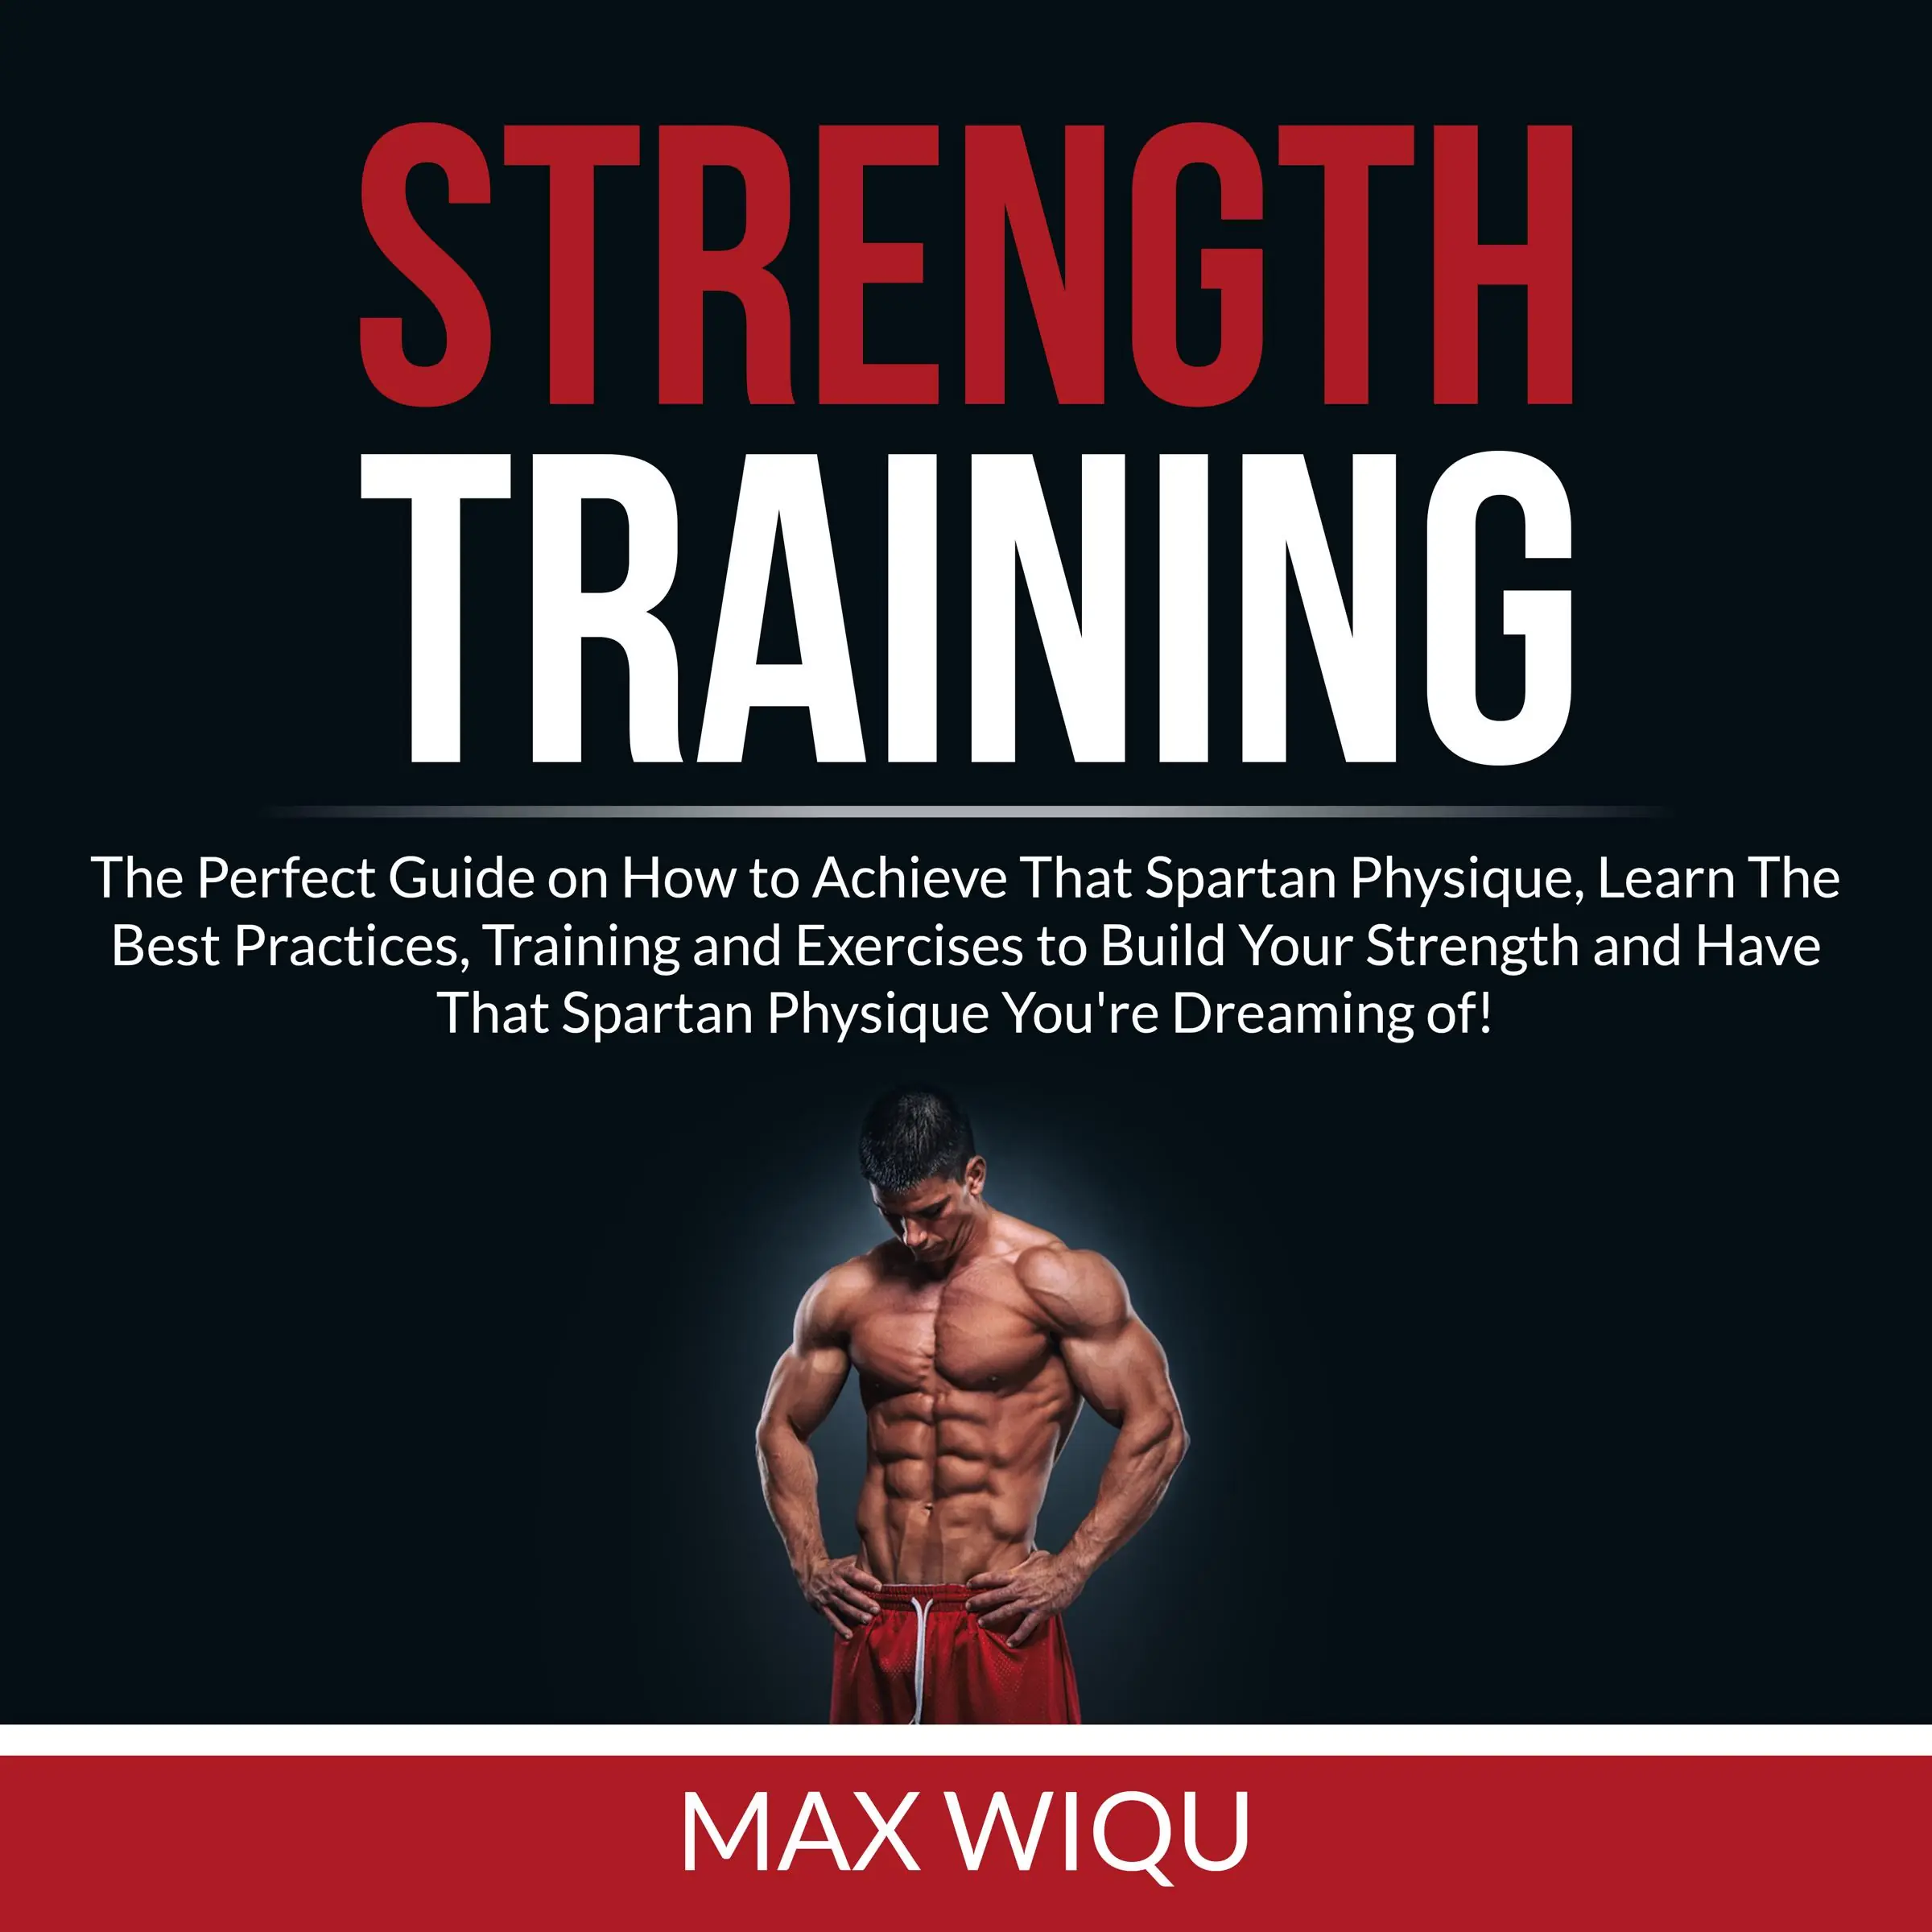 Strength Training: The Perfect Guide on How to Achieve That Spartan Physique, Learn The Best Practices, Training and Exercises to Build Your Strength and Have That Spartan Physique You're Dreaming of Audiobook by Max Wiqu